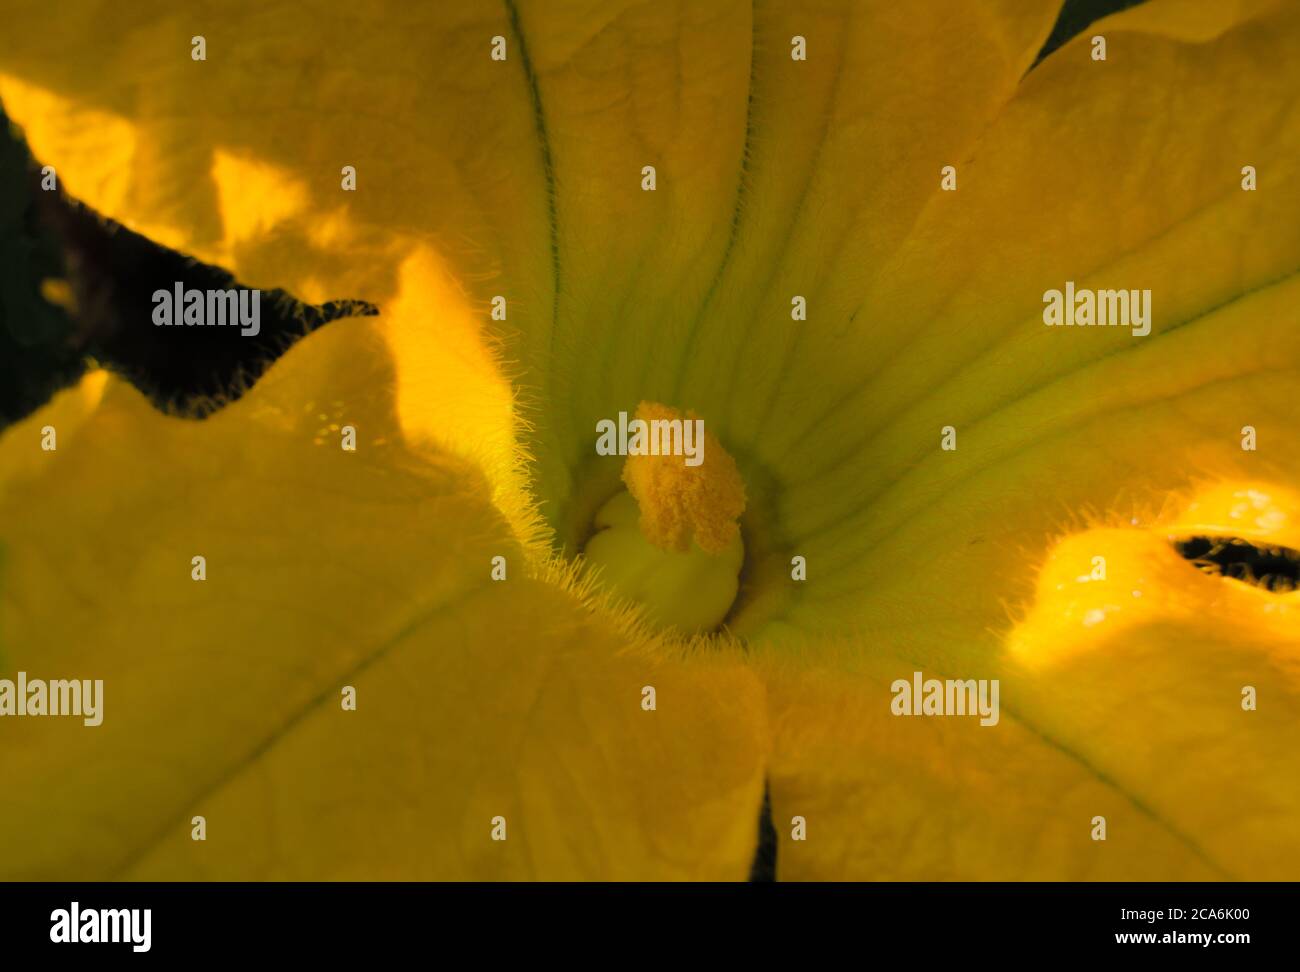 Close-up of a zucchini Flower under the sunlight Stock Photo